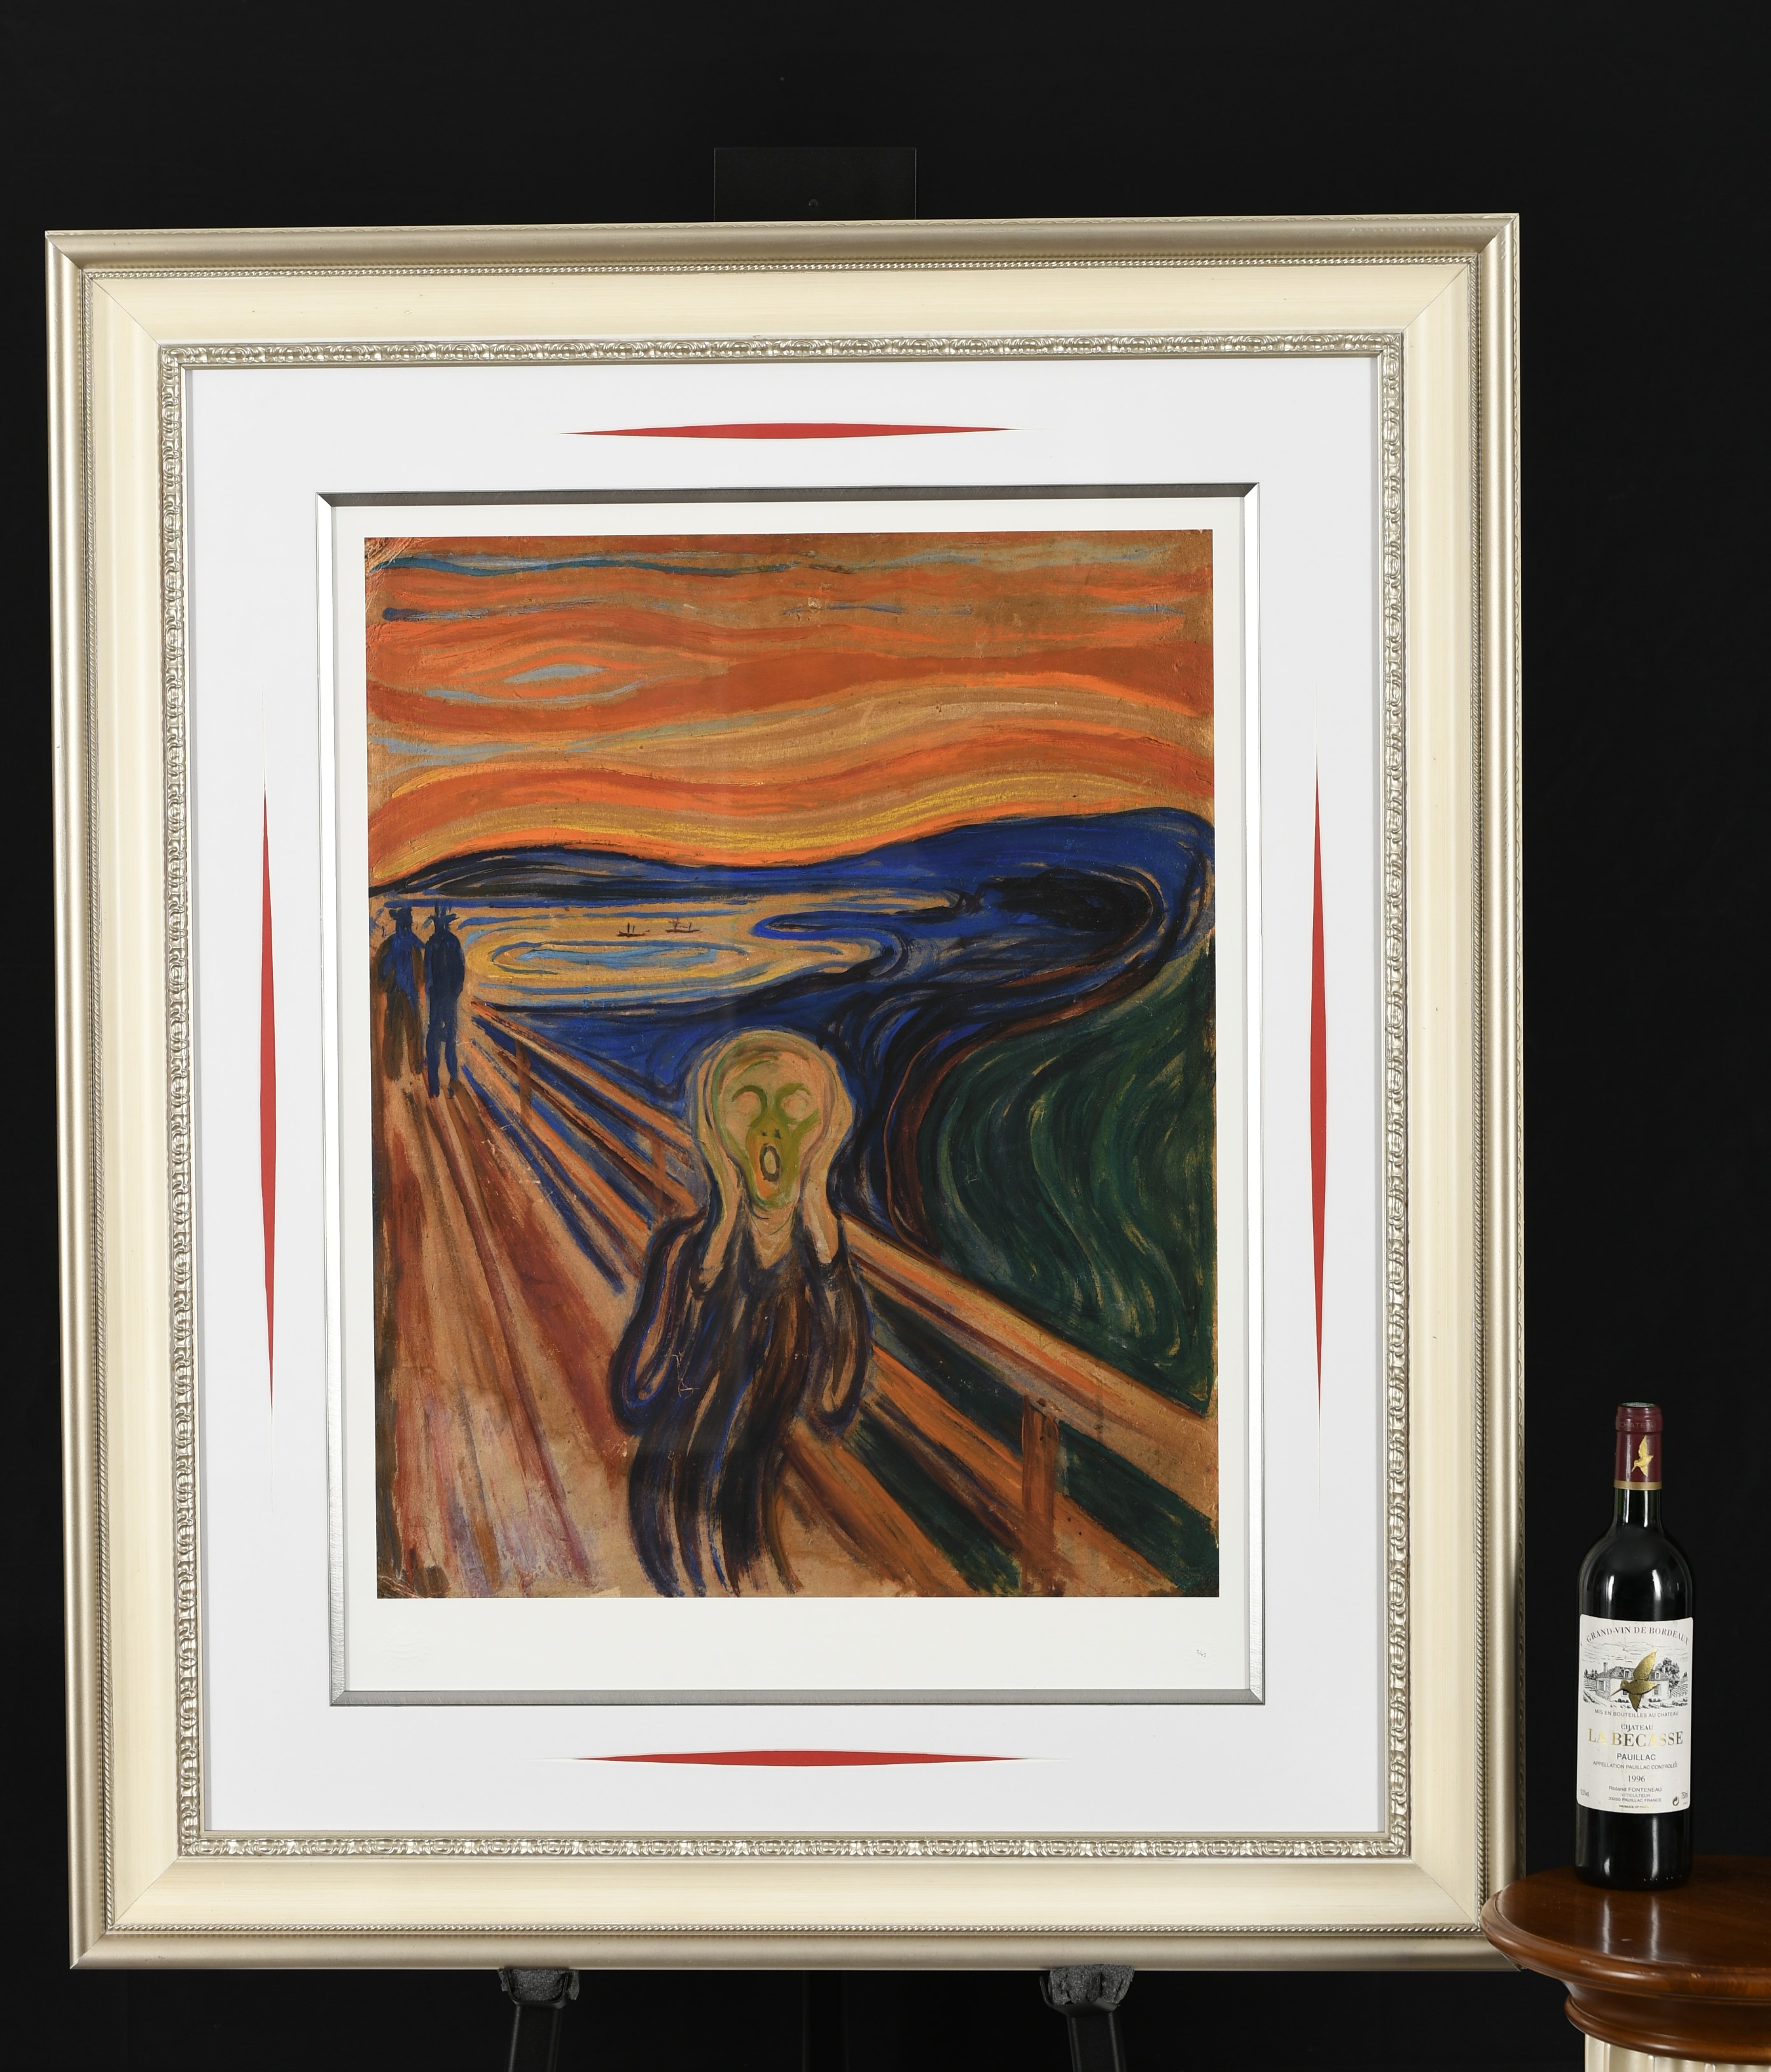 Rare Limited Edition Edvard Munch ""The Scream"" - Image 2 of 8